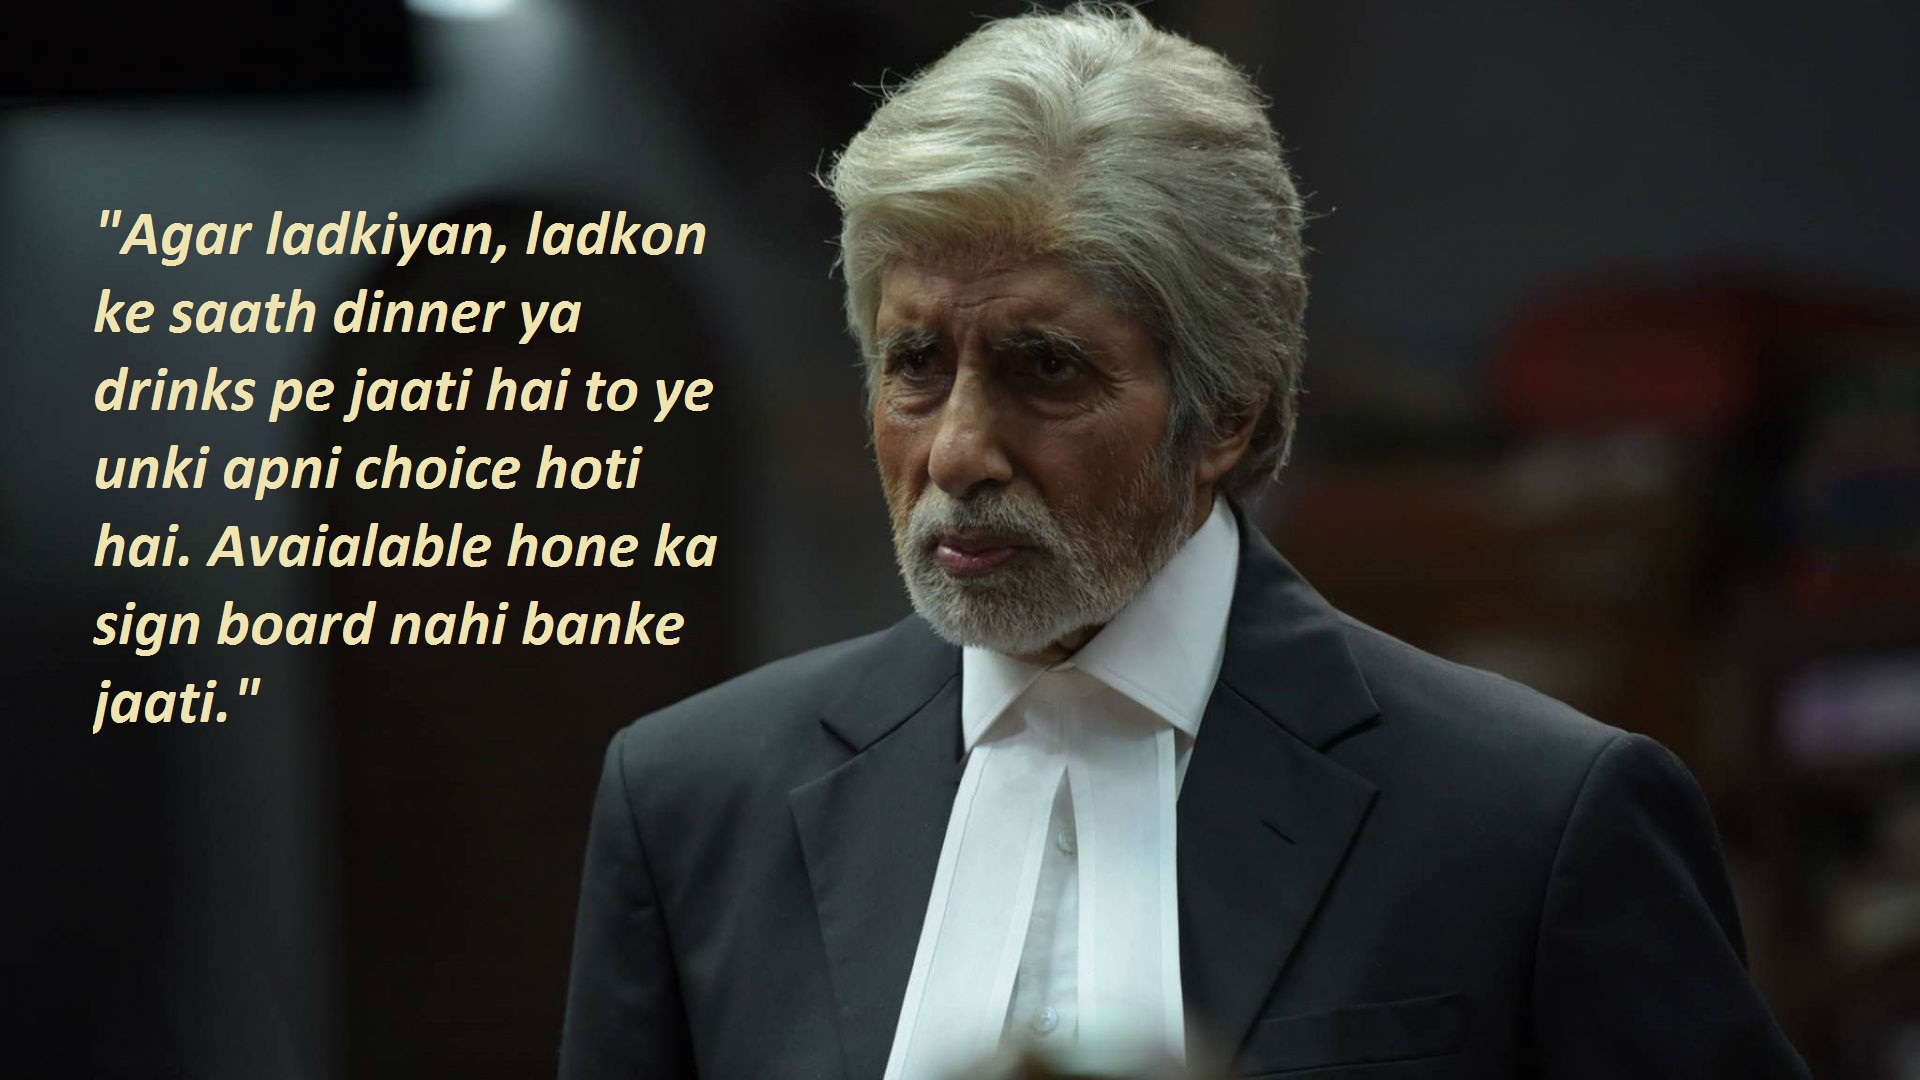 8. Best Dialogues From PINK Movie